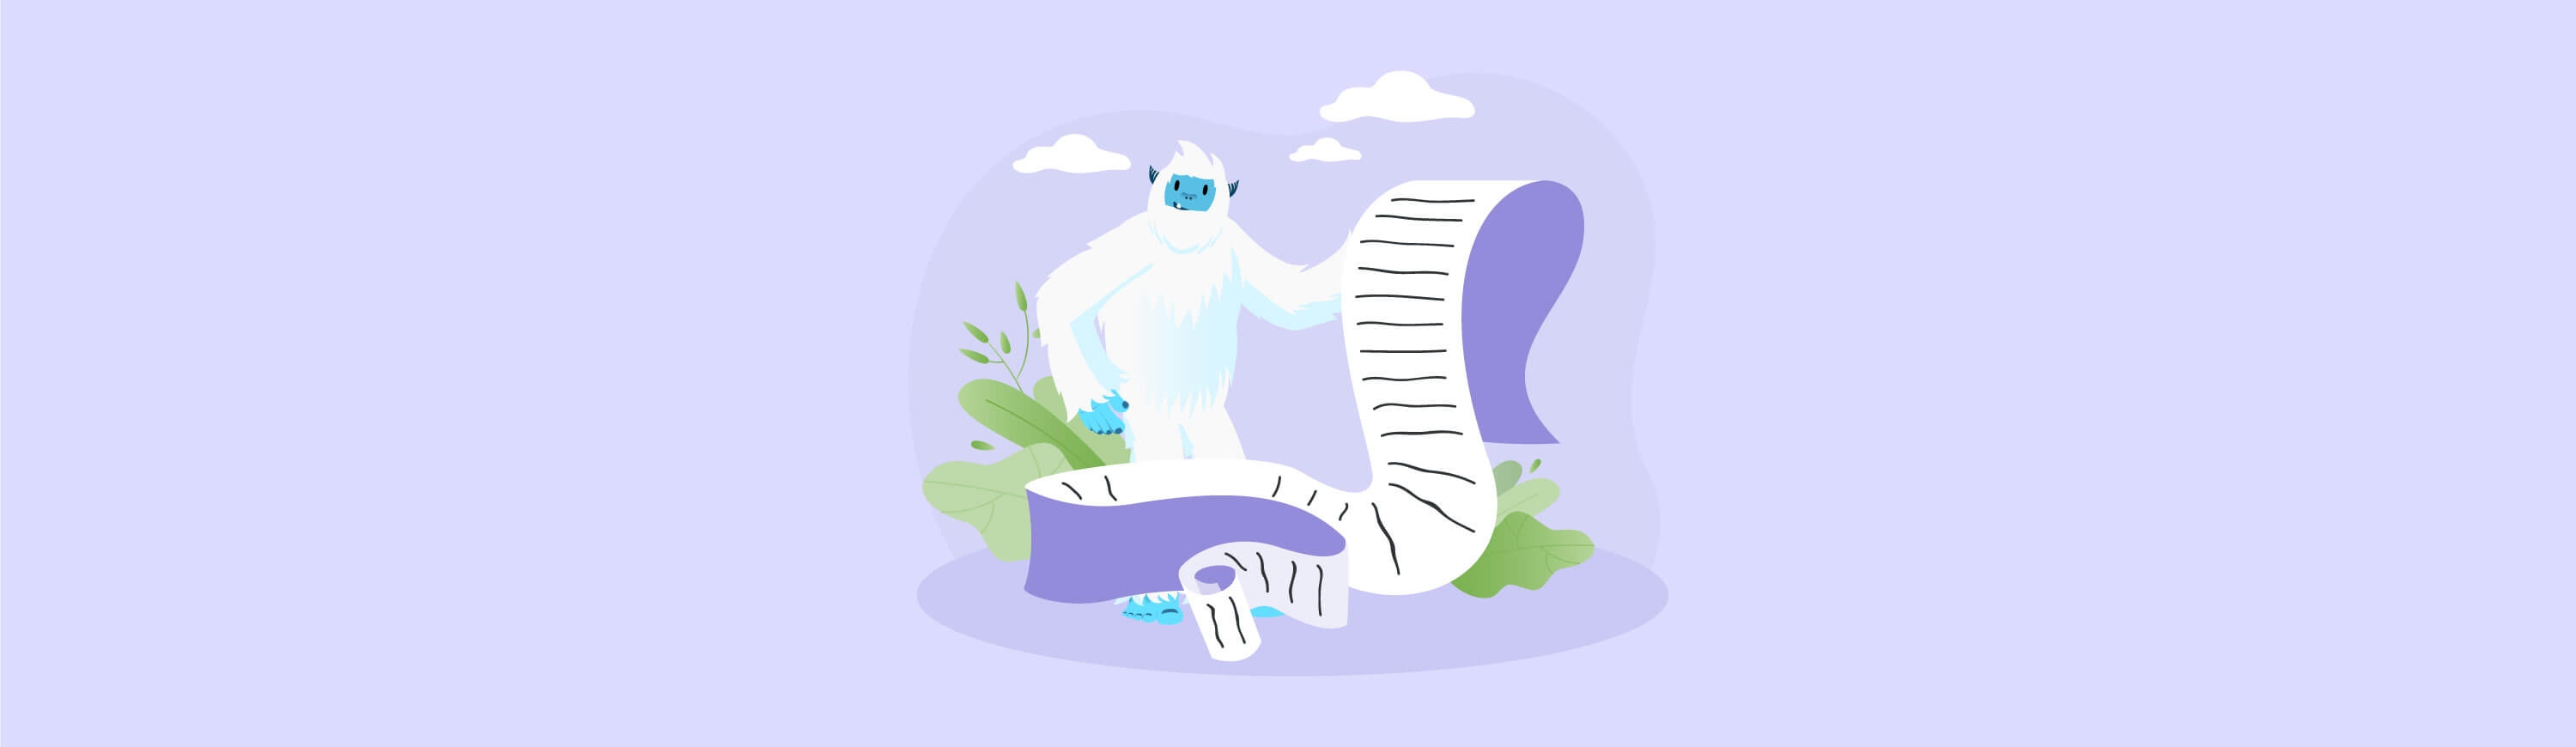 Illustration of Carl the yeti cheering on a calender celebrating employee appreciation day.